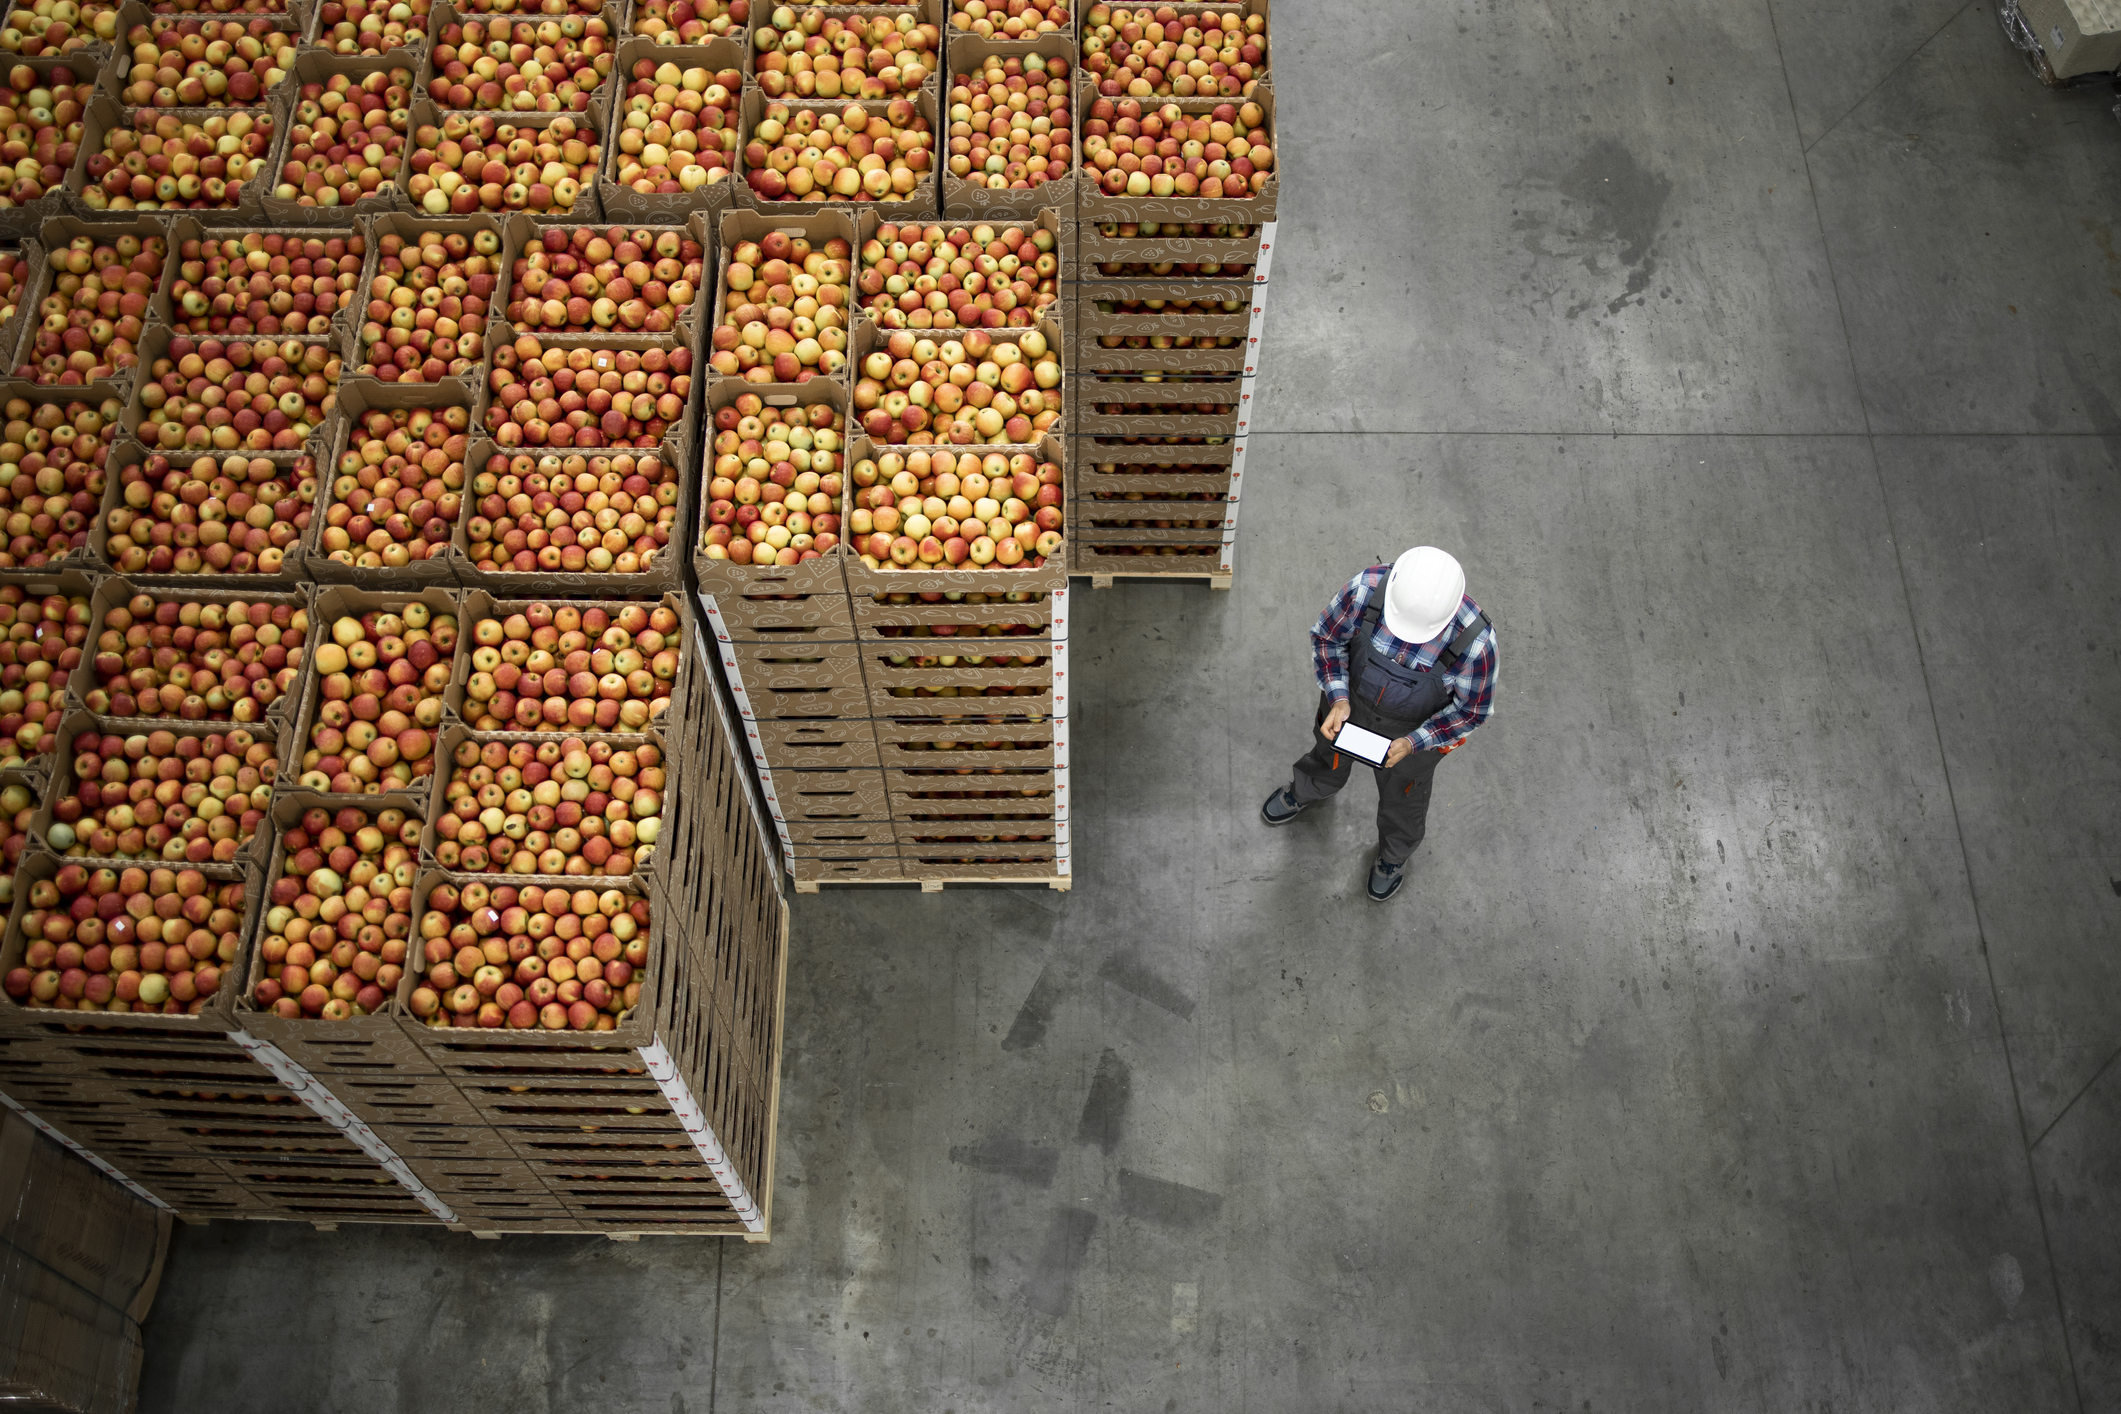 Tracking the Right Metrics for an Efficient Food Supply Chain